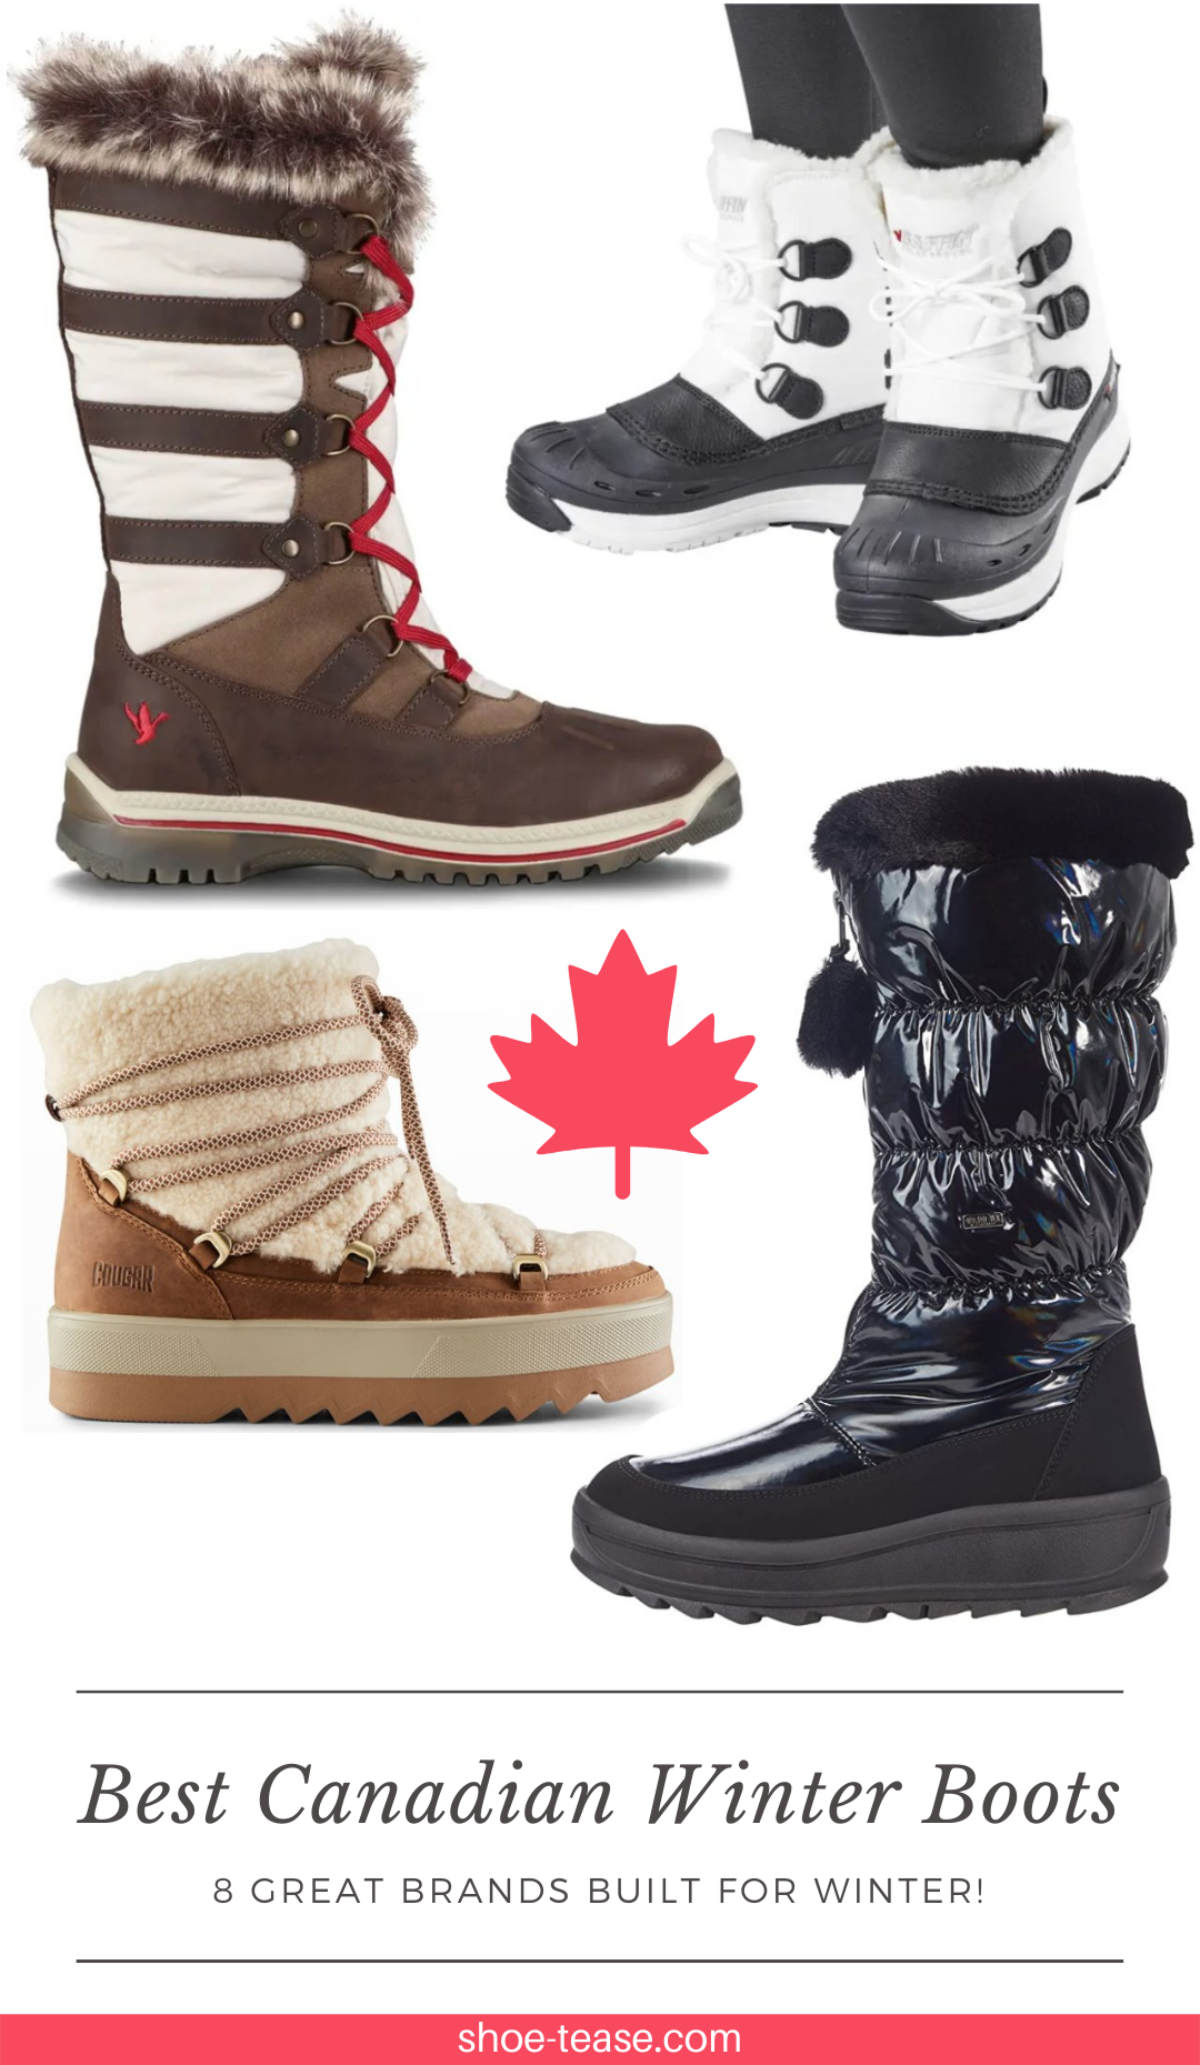 Mijnenveld Druipend engineering 8 Best Canadian Winter Boots to Keep Warm in the Snow & Cold - 2022